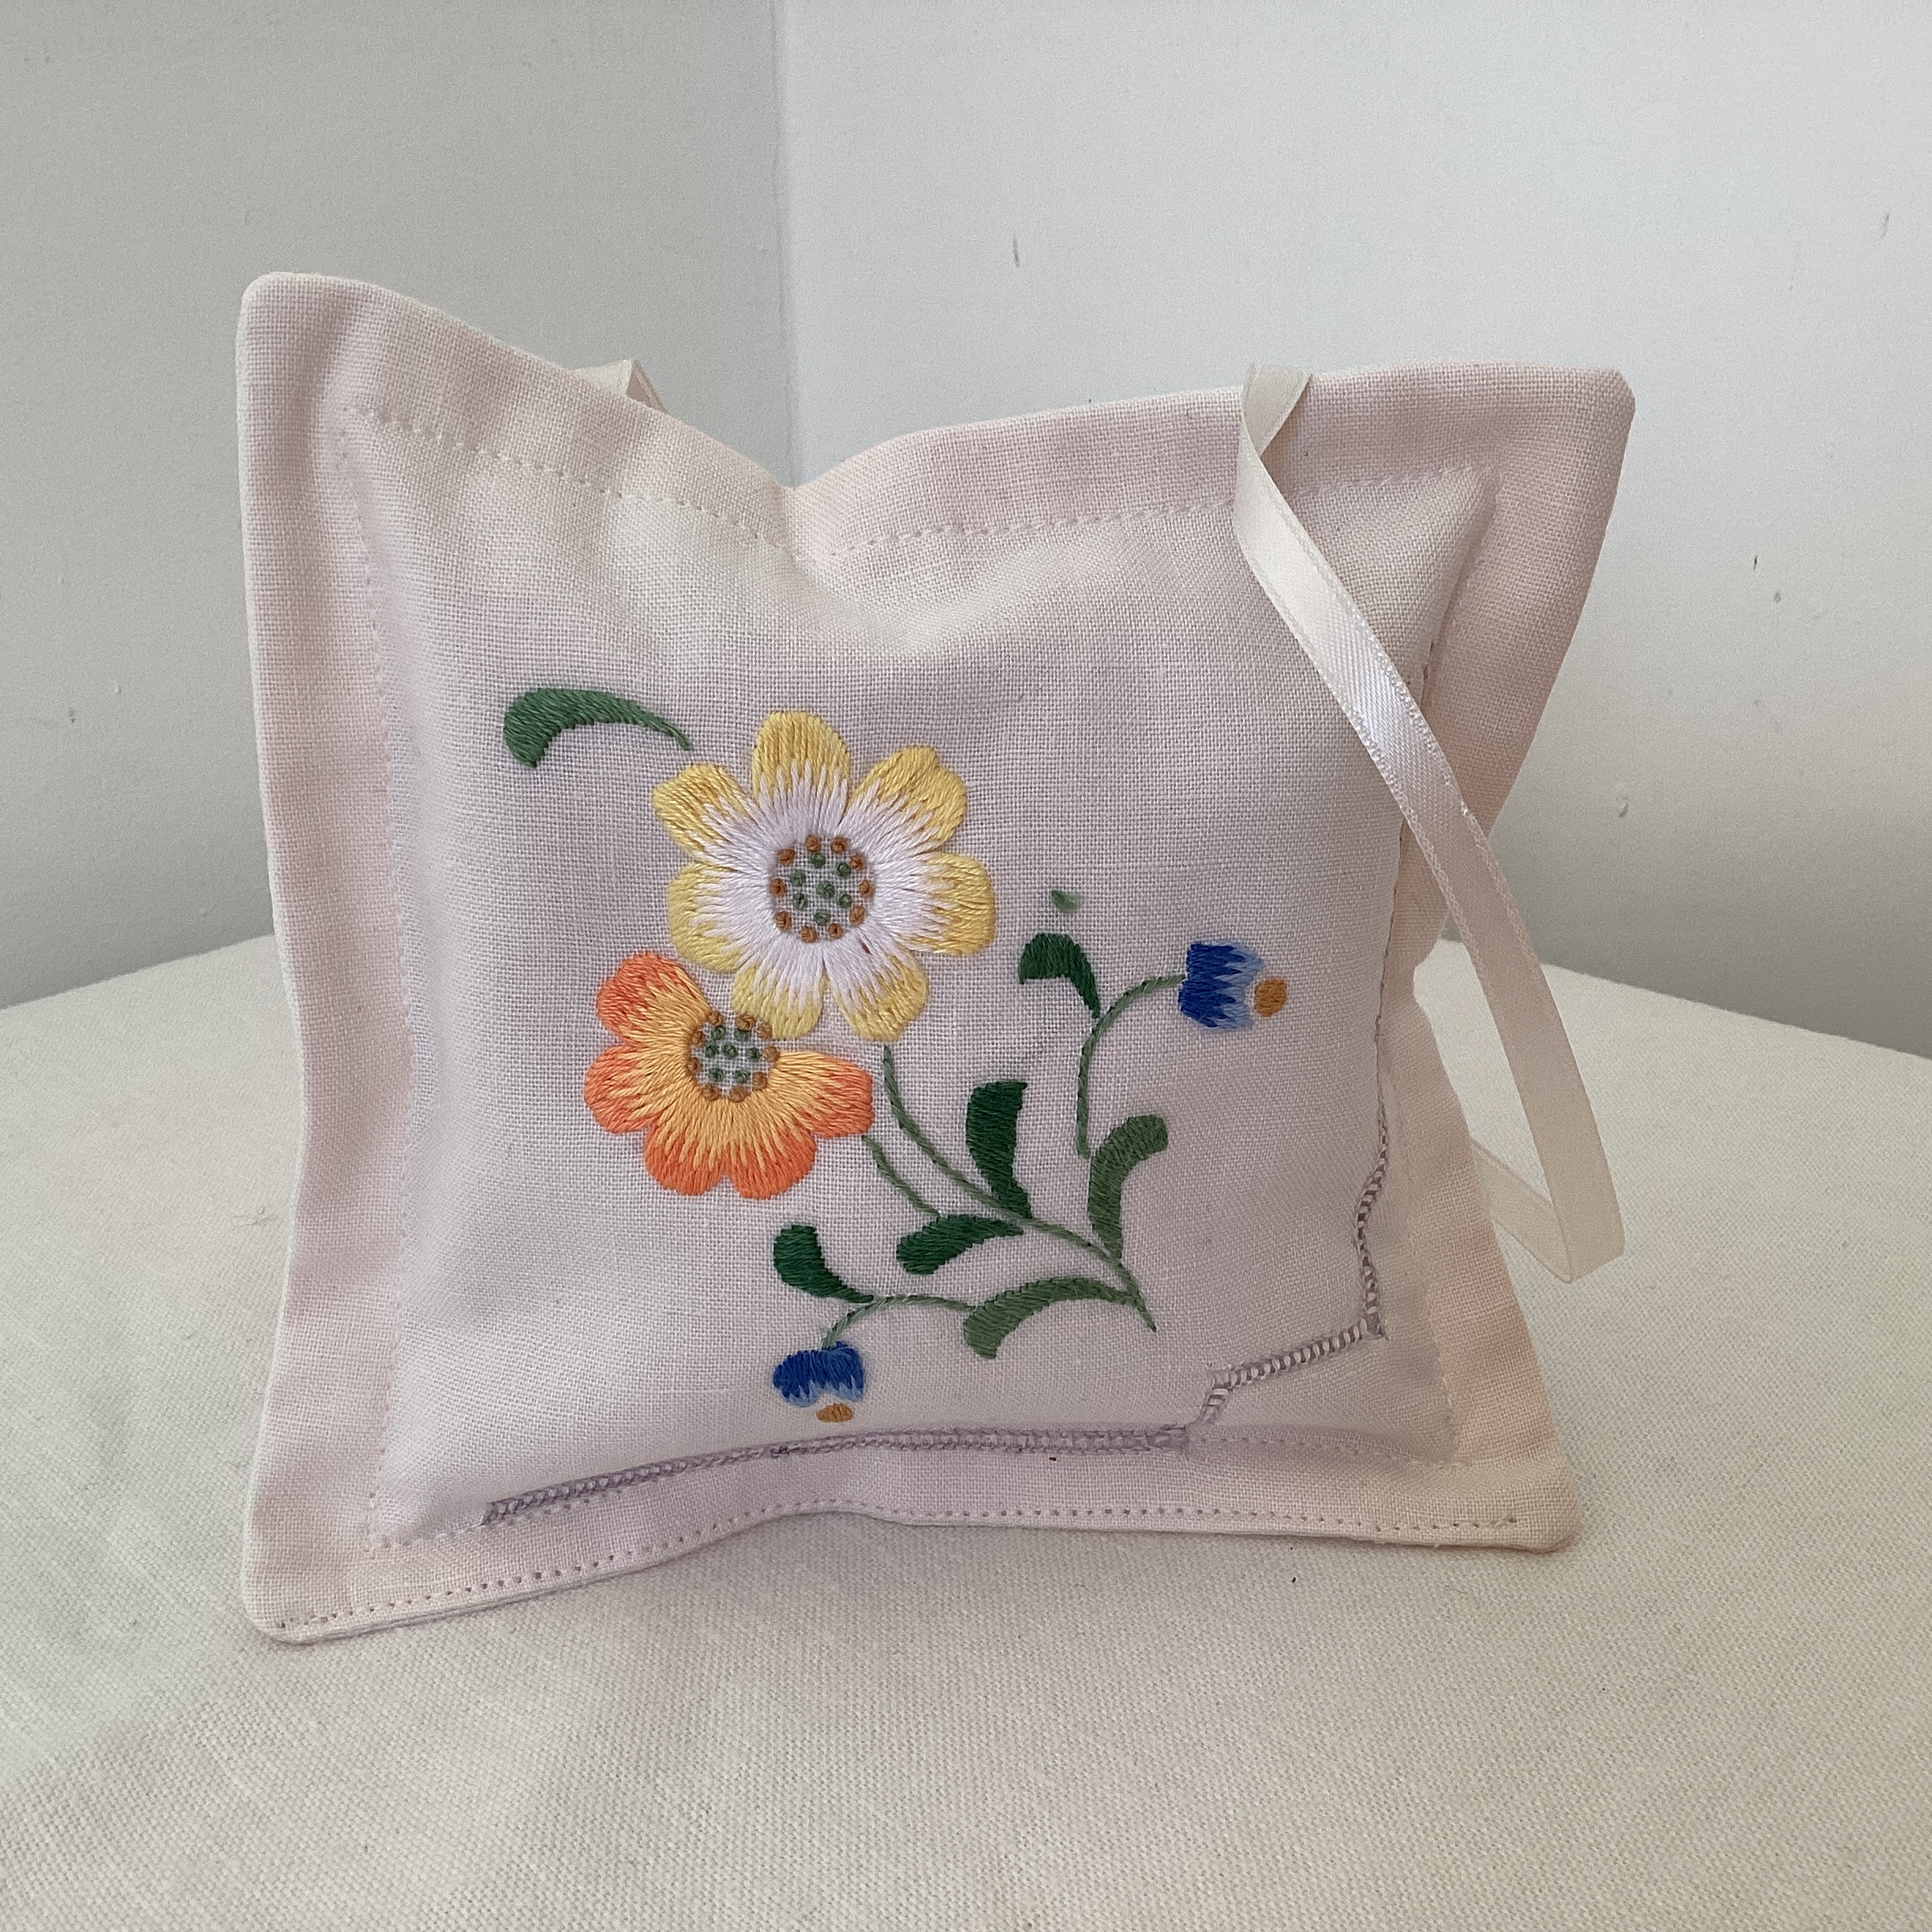 Lavender Bag - vintage embroidery orange and yellow flowers